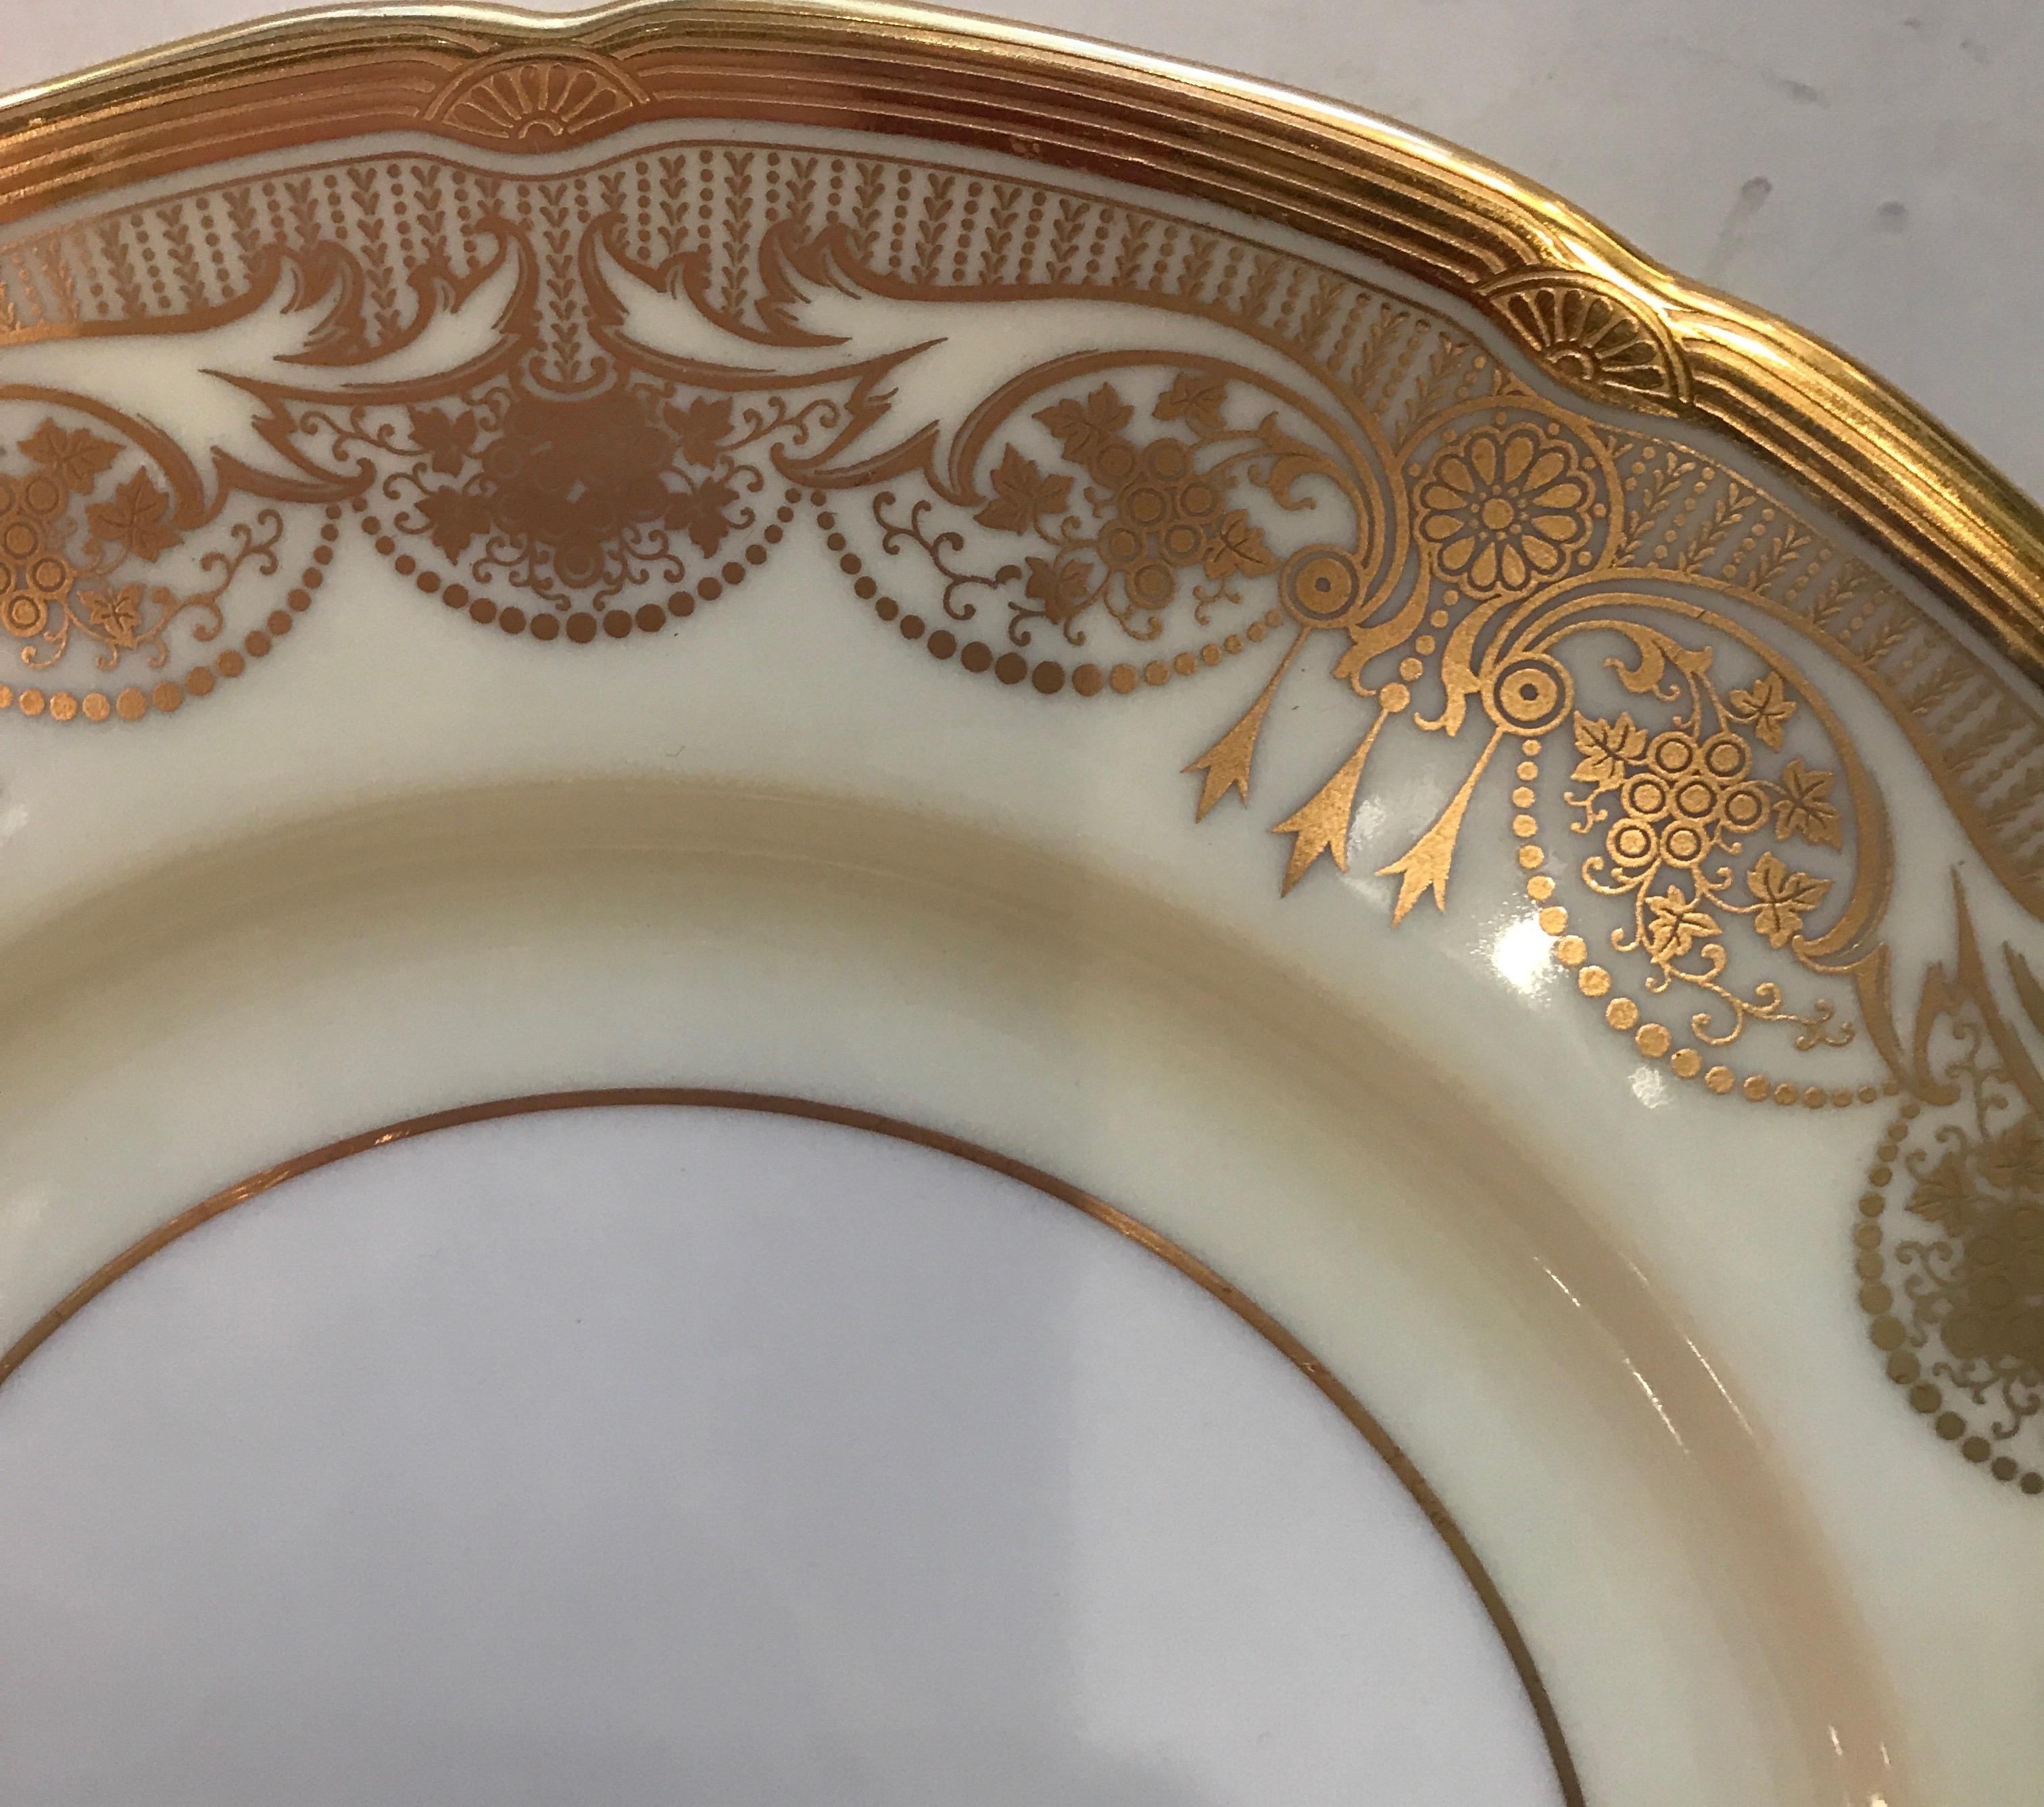 American A Set of 12 Gold Encrusted Service Dinner Plates